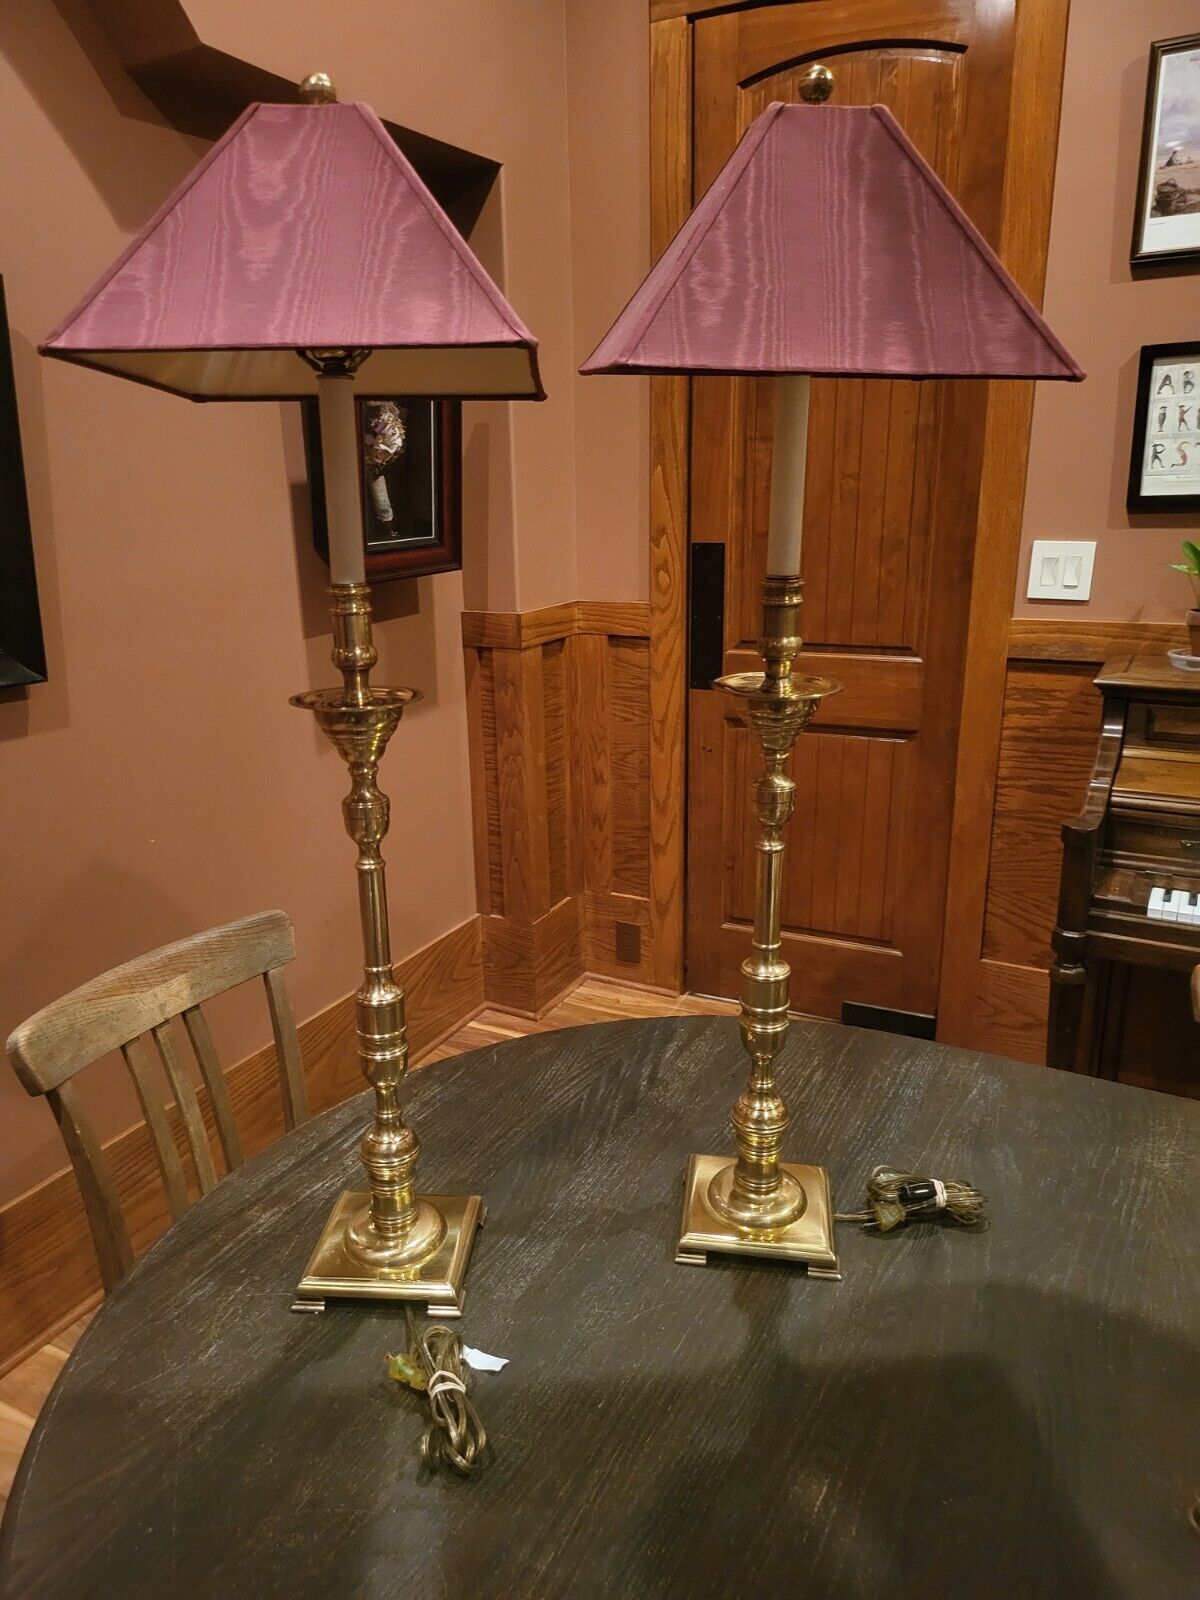 Pair of Tall Frederick Cooper Solid Bass Candlestick Lamps With Original Shades.